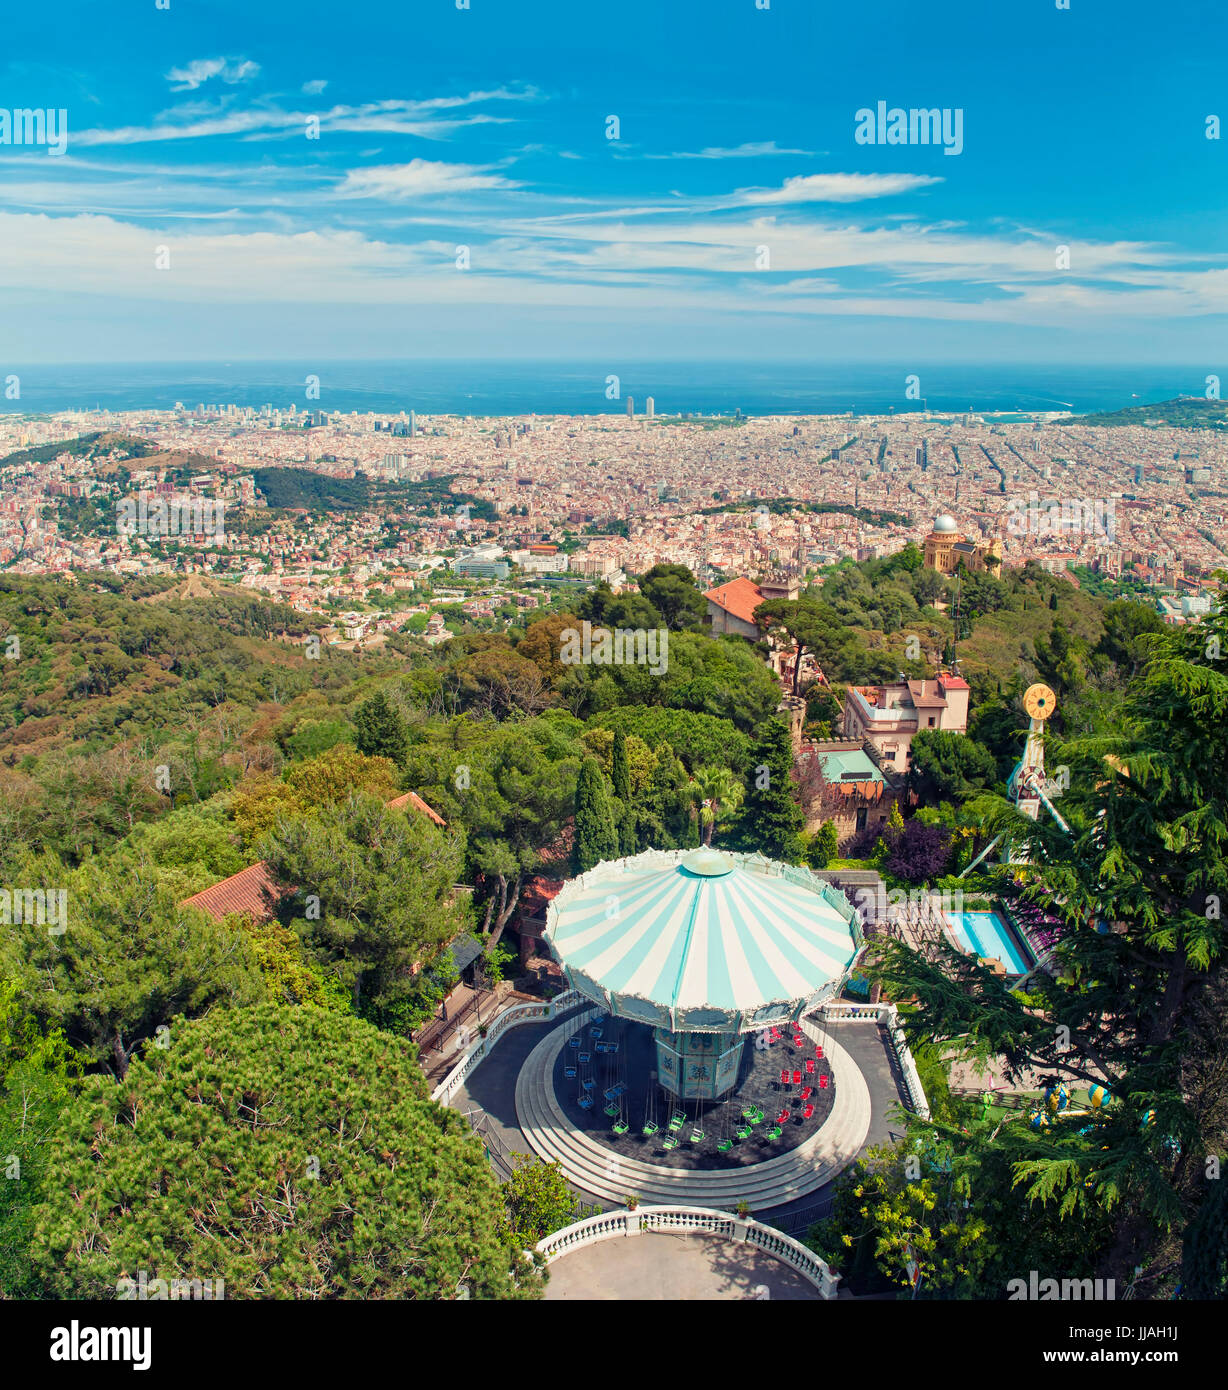 cross-processed image of Barcelona city view and amusement park from top of Tibidabo mountain on sunny summer day, Barcelona, Catalonia, Spain Stock Photo